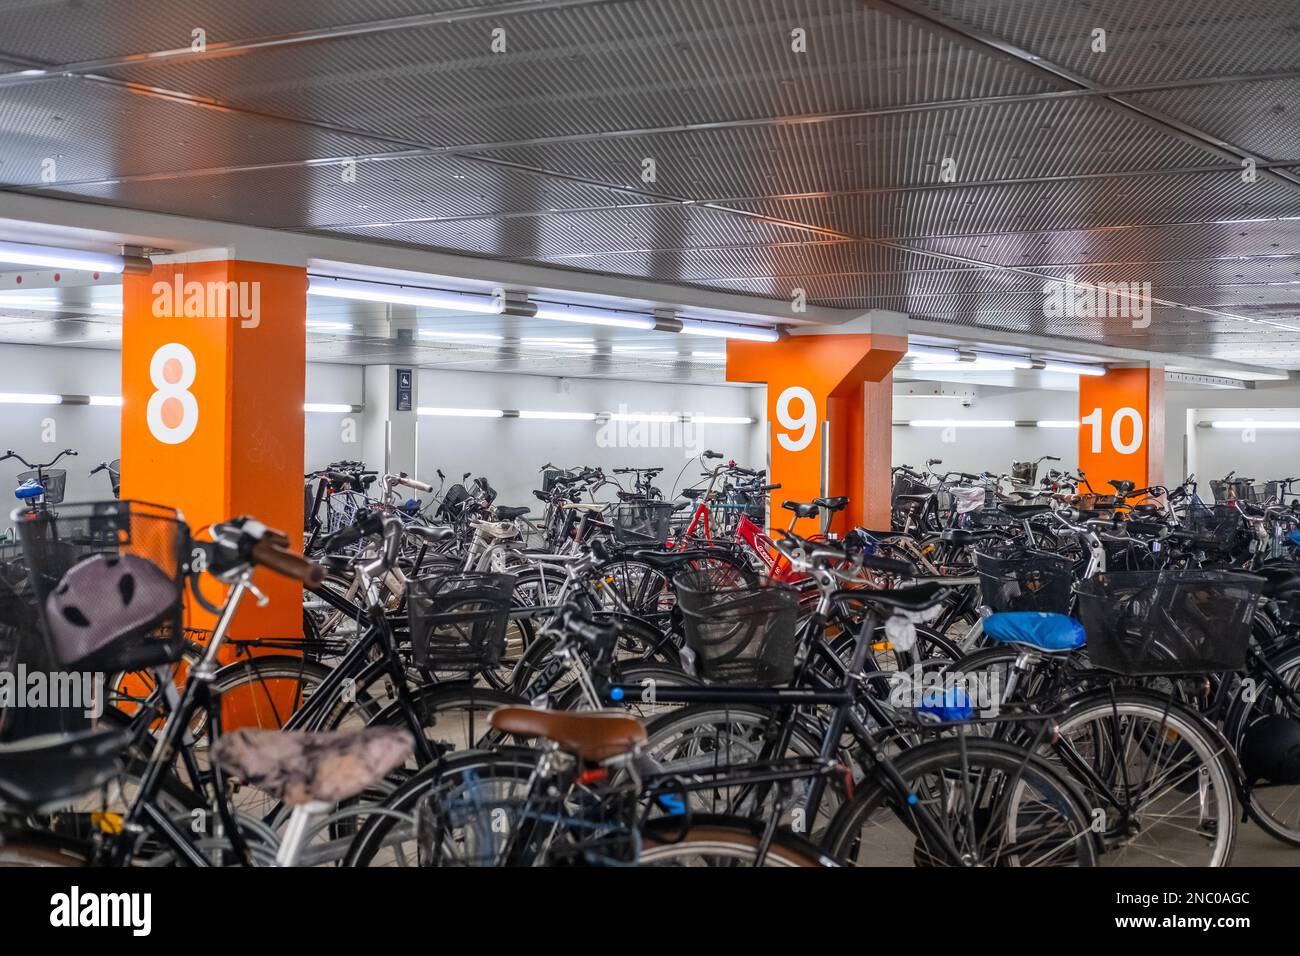 Lyngby, Denmark - January 9, 2020: Underground bicycle parking at Lyngby Train Station. Editorial photo. Stock Photo